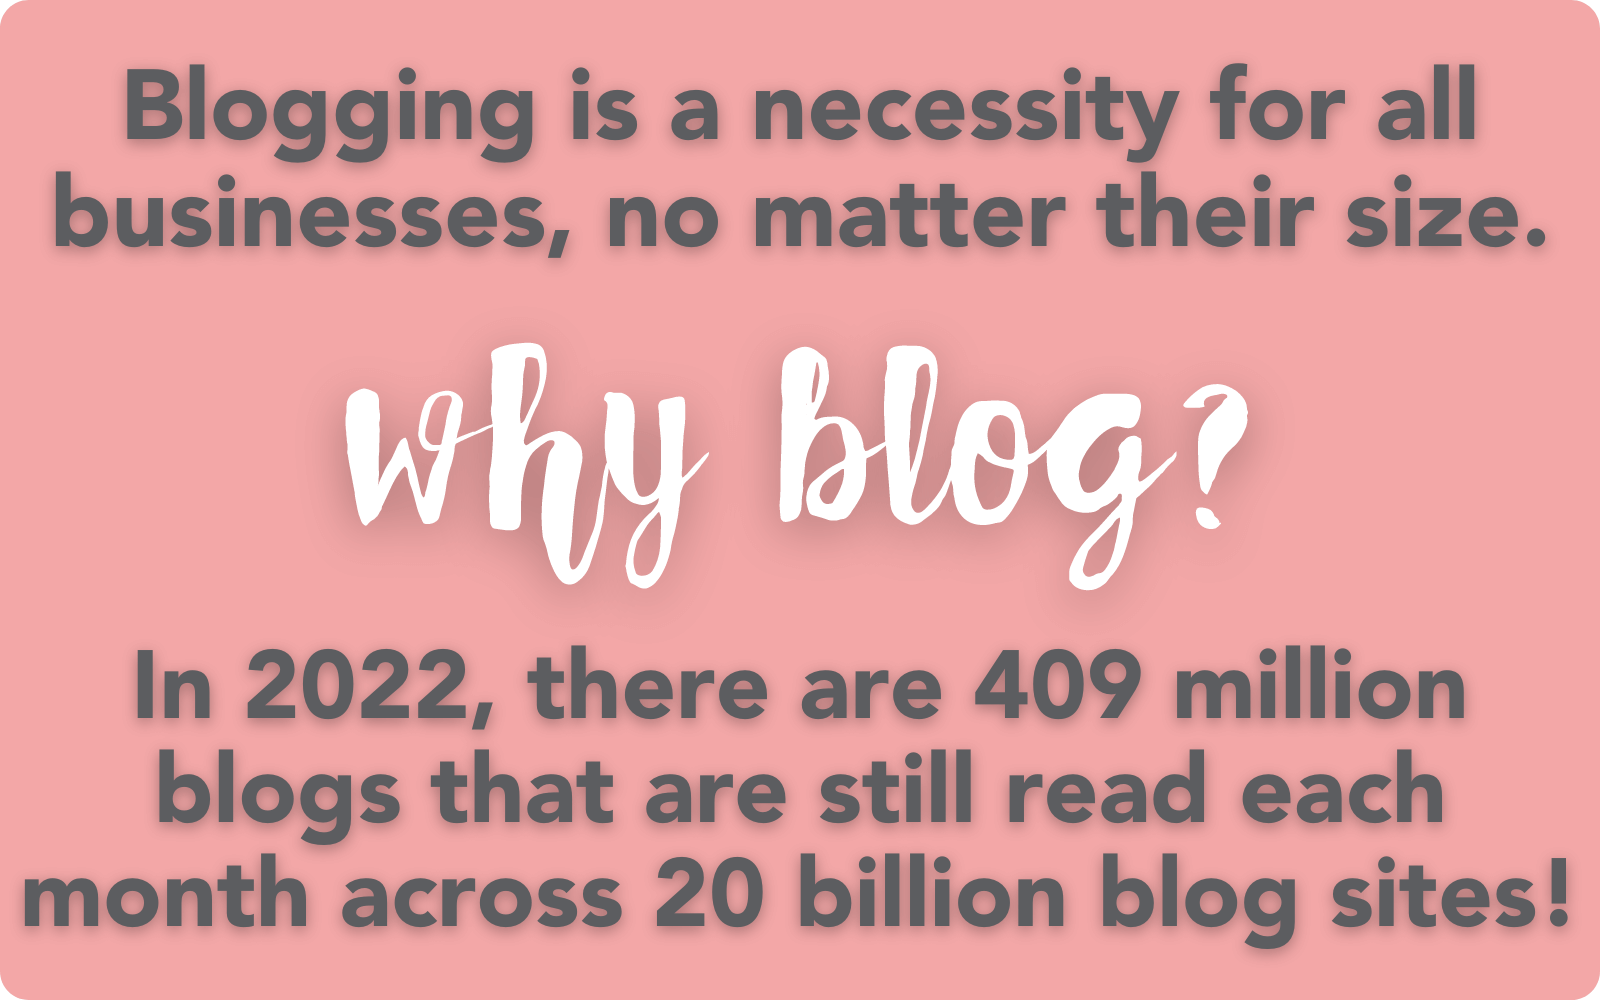 blogging is a necessity for all businesses, no matter their size. In 2022 there are 409 million blogs, that are still read each month across 20 billion blog sites. 